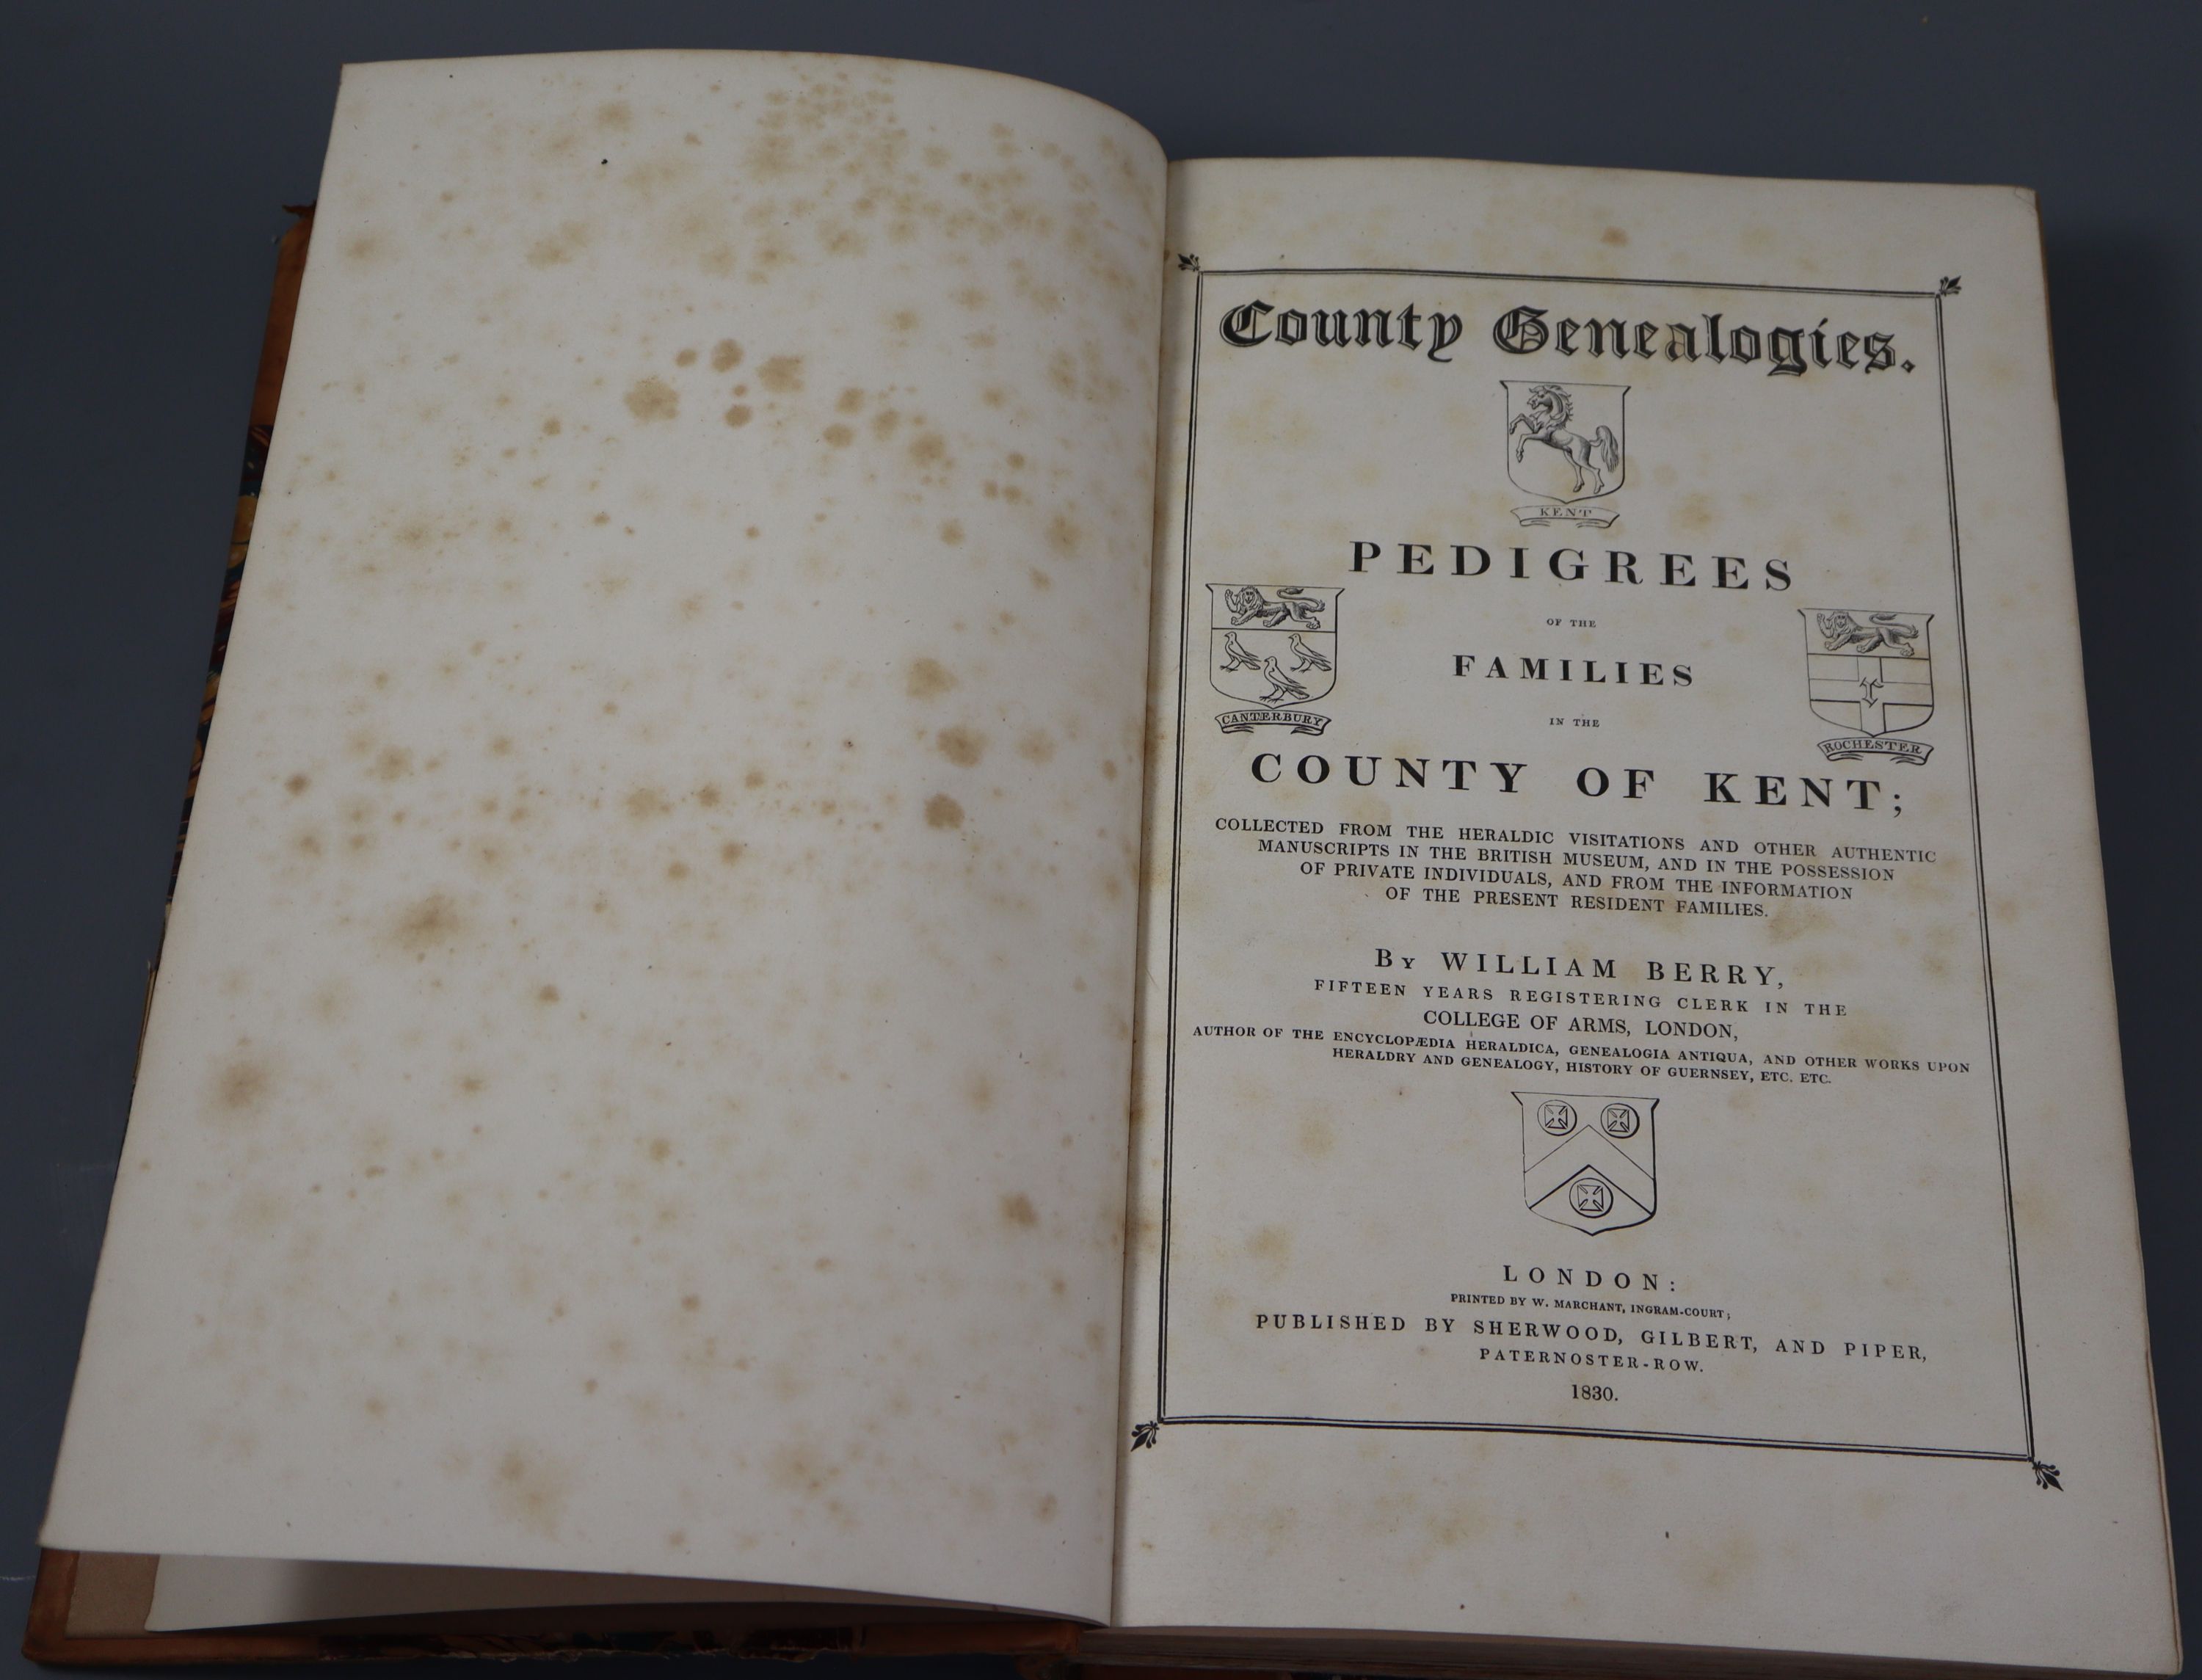 Berry, William - Pedigrees of the Families in the County of Kent, London 1830; Larking, Lambert - Image 6 of 15